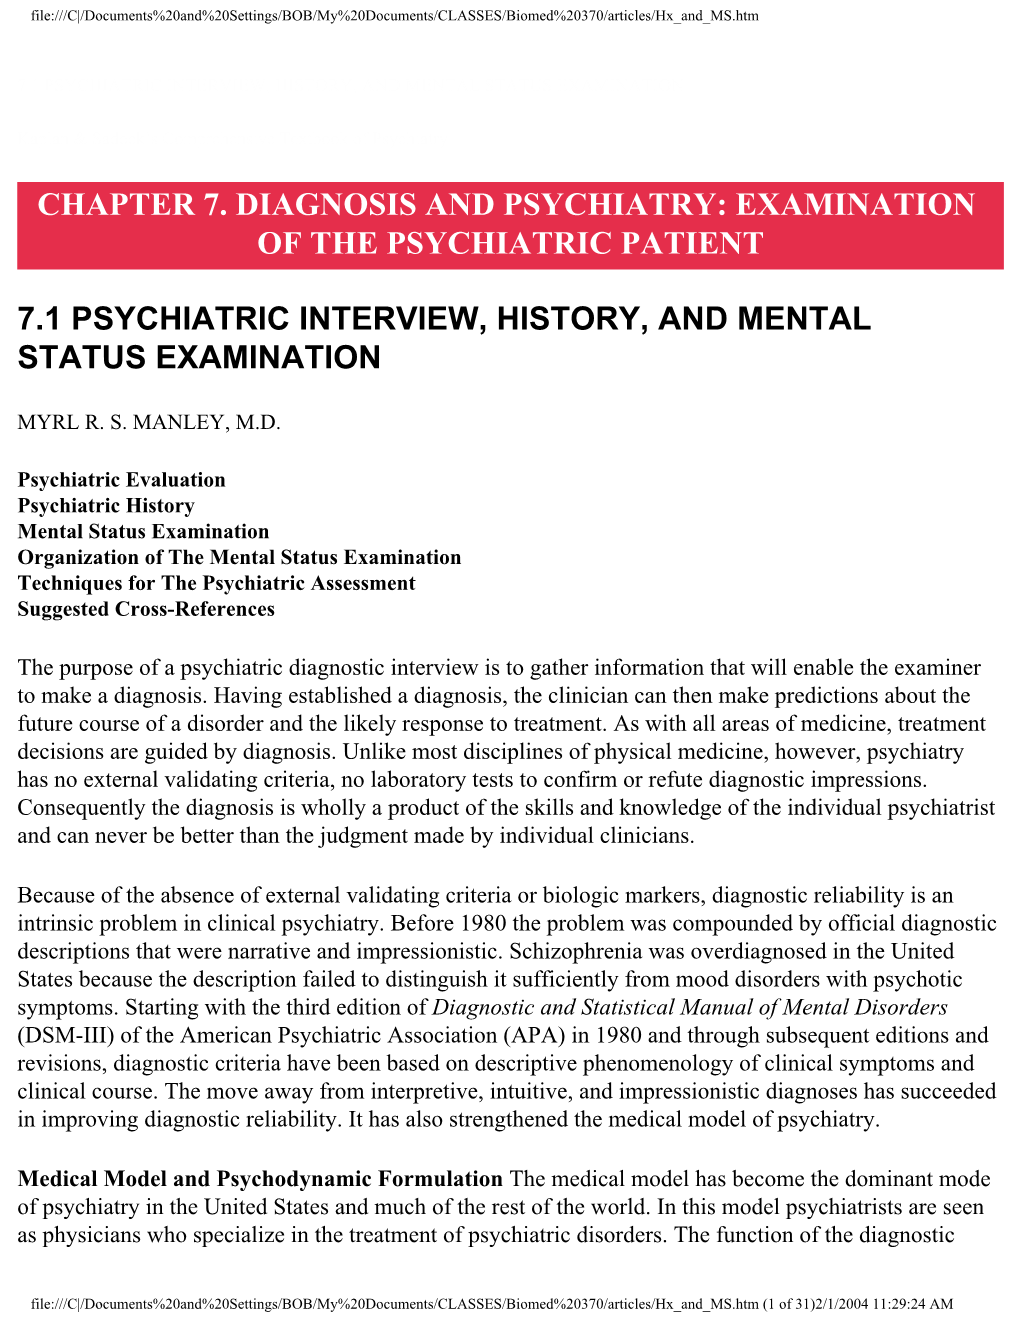 Chapter 7. Diagnosis and Psychiatry: Examination of the Psychiatric Patient